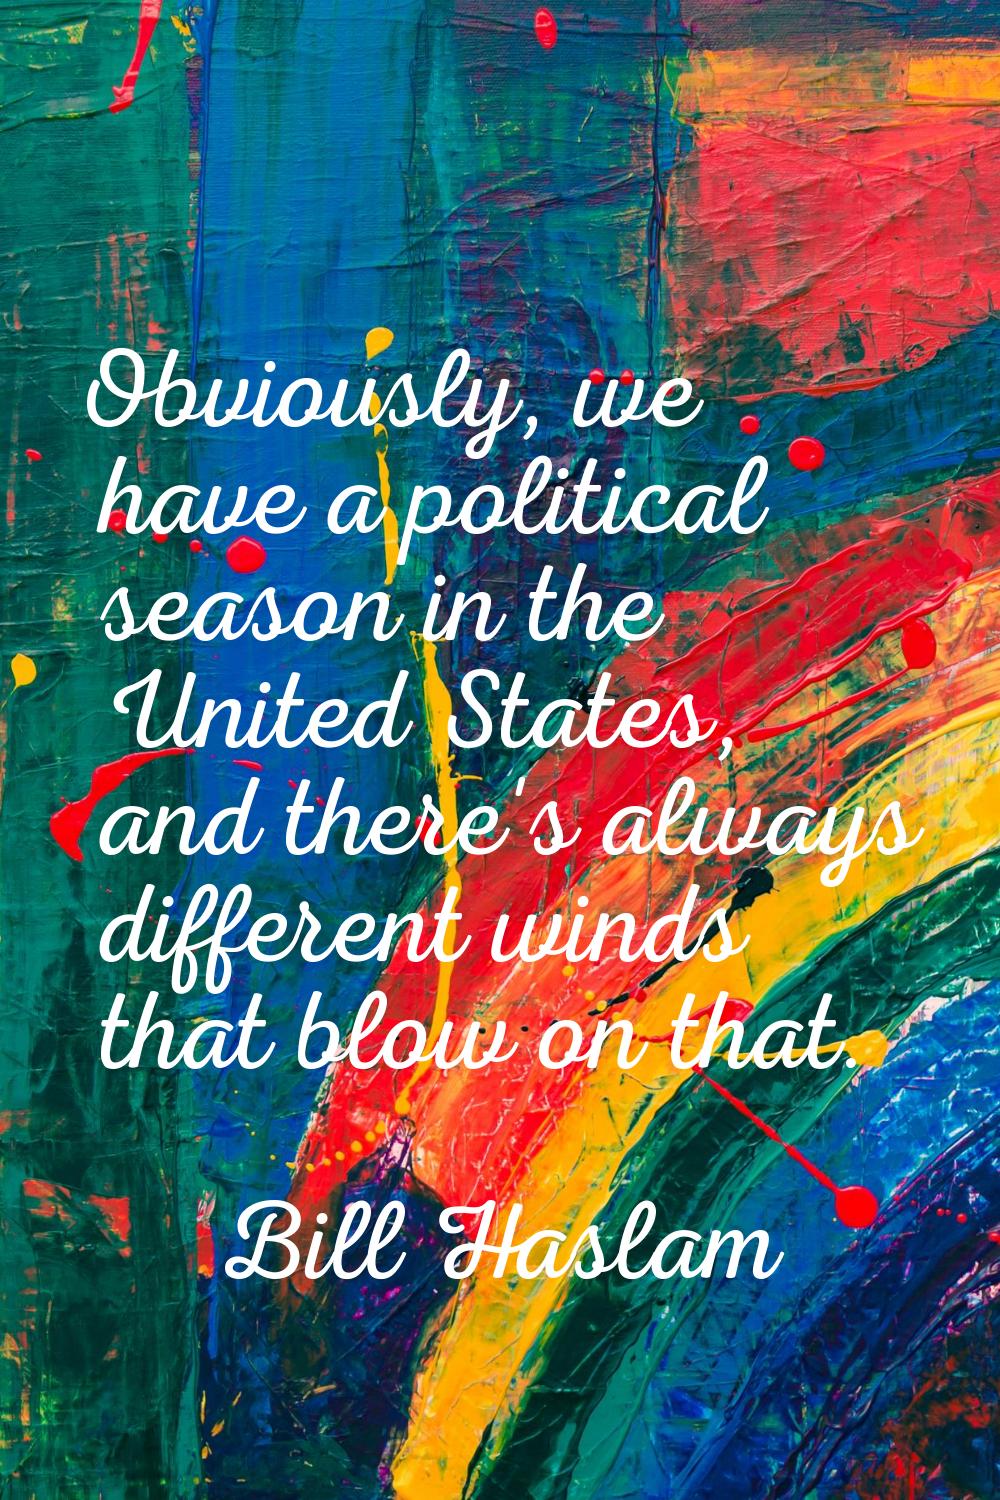 Obviously, we have a political season in the United States, and there's always different winds that